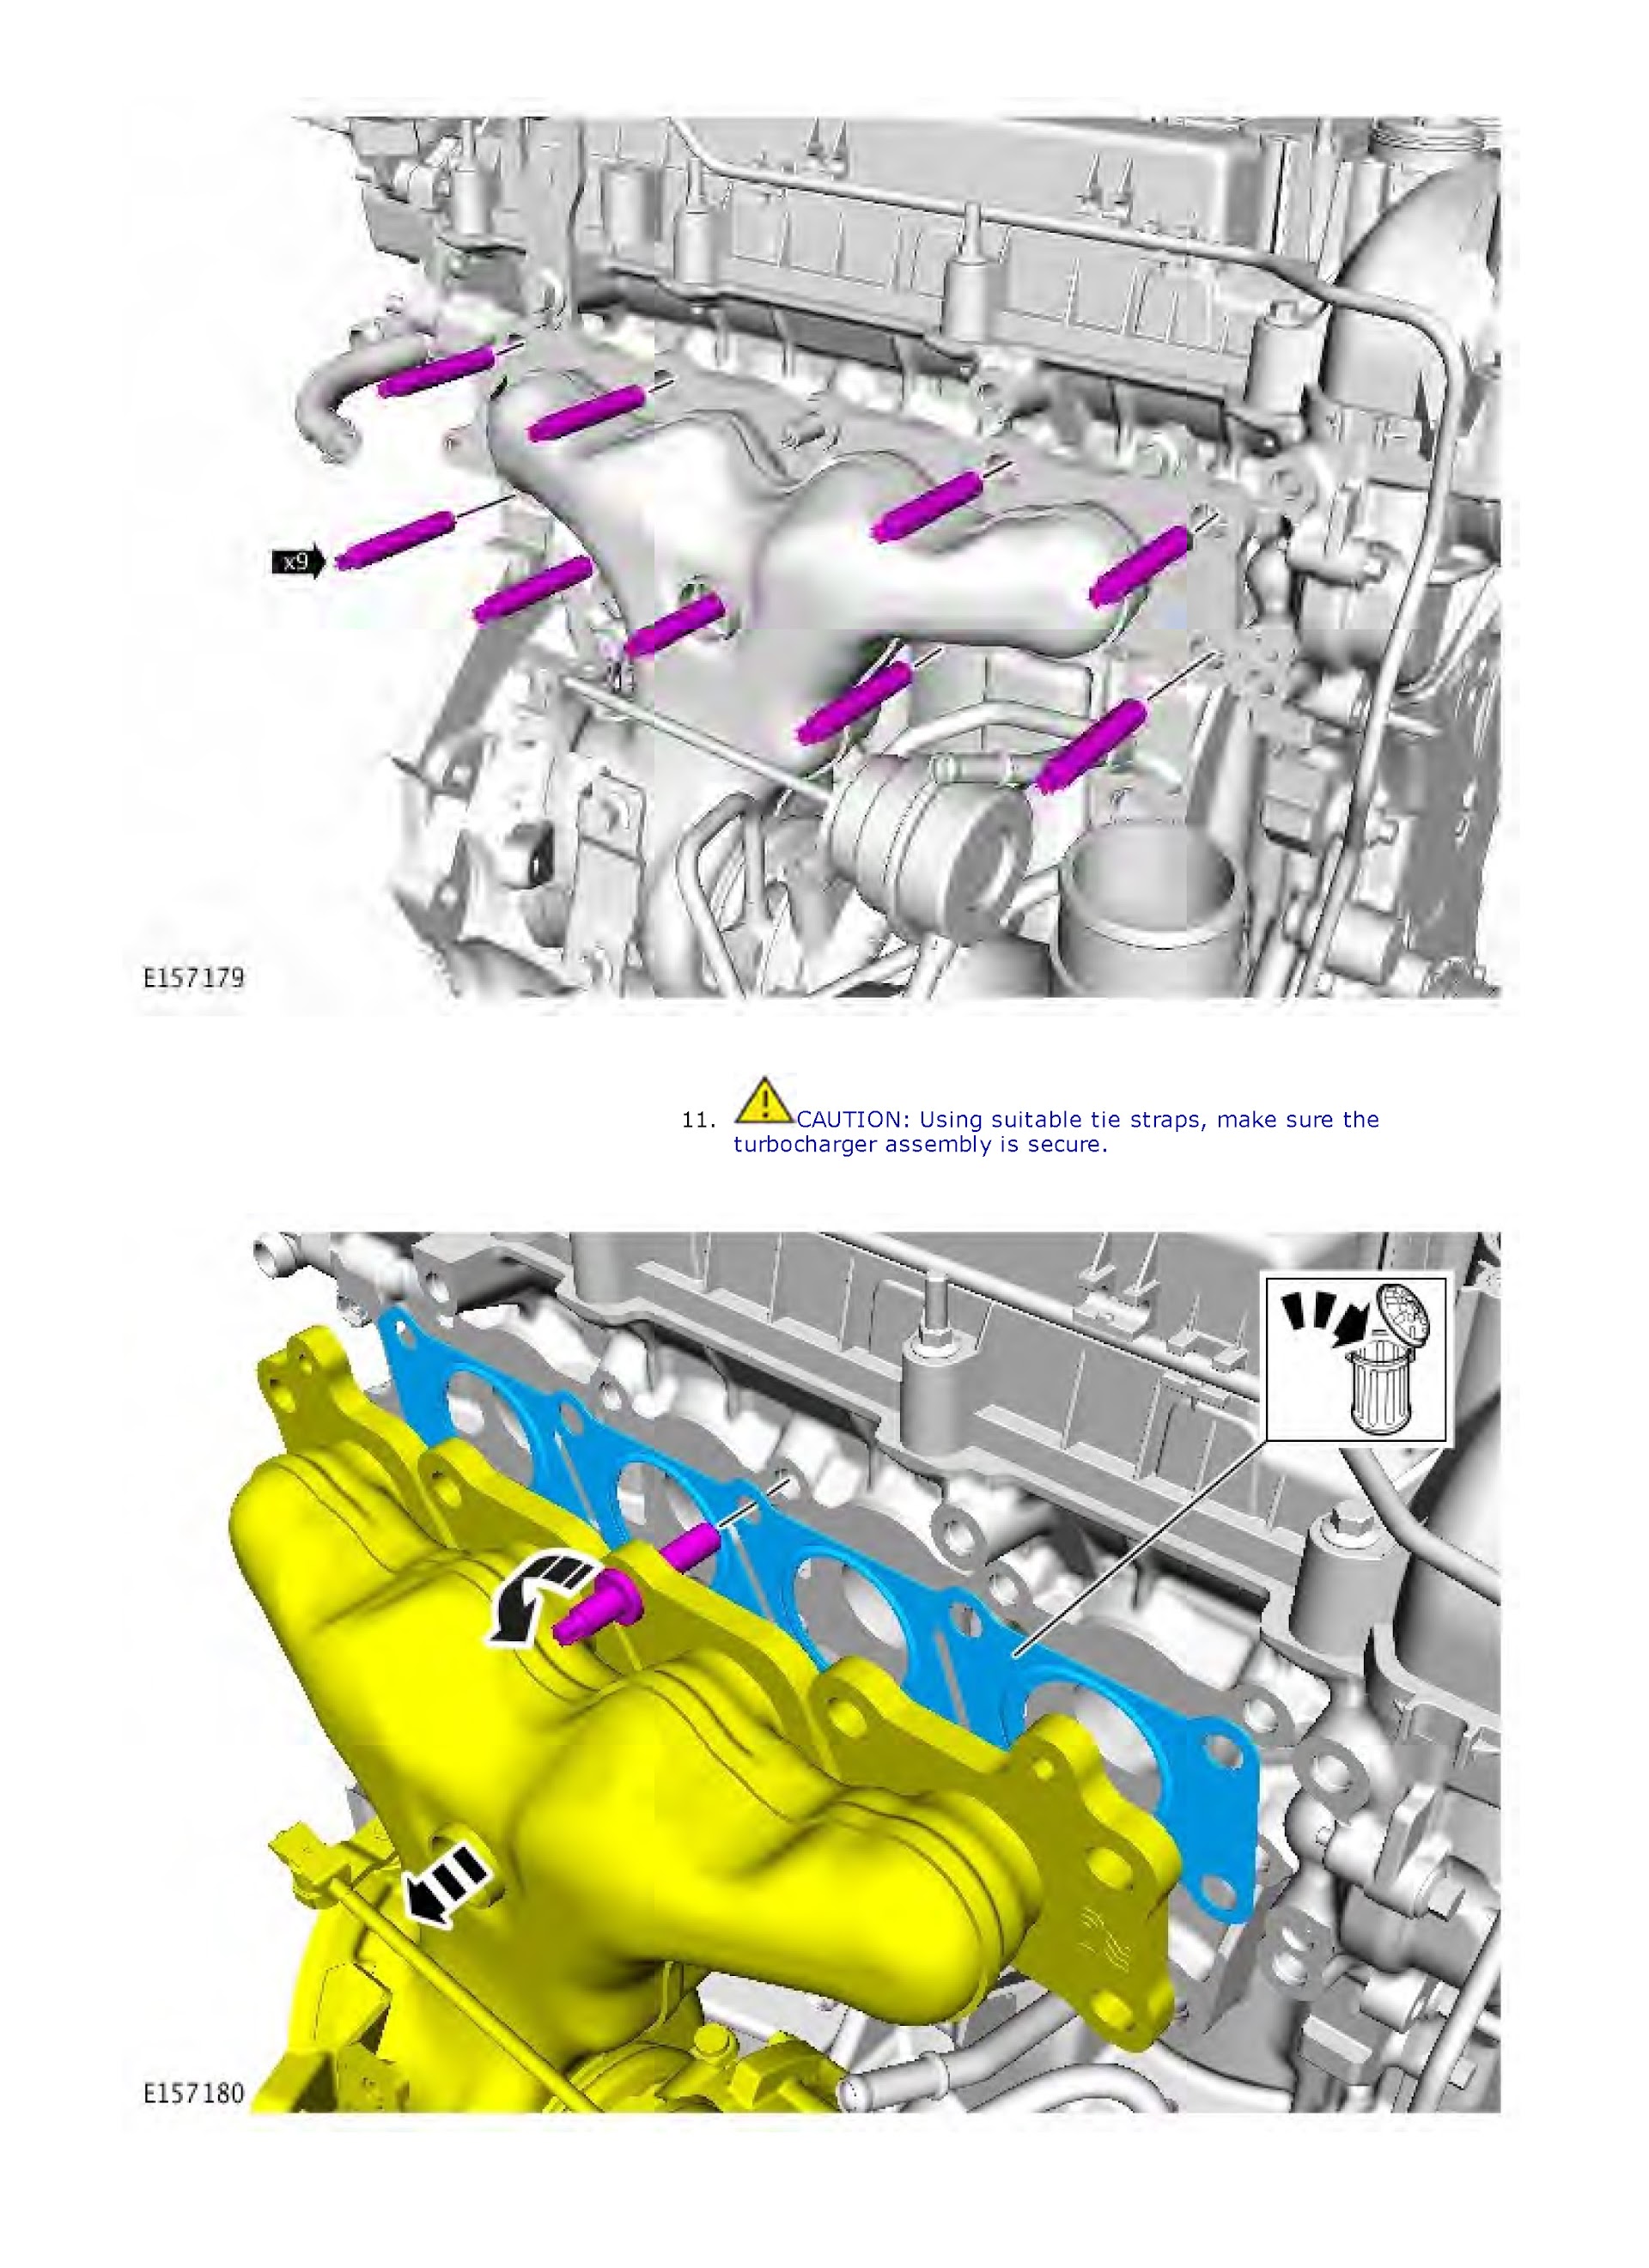 2014 Range Rover Evoque Repair Manual, Turbocharge Assembly